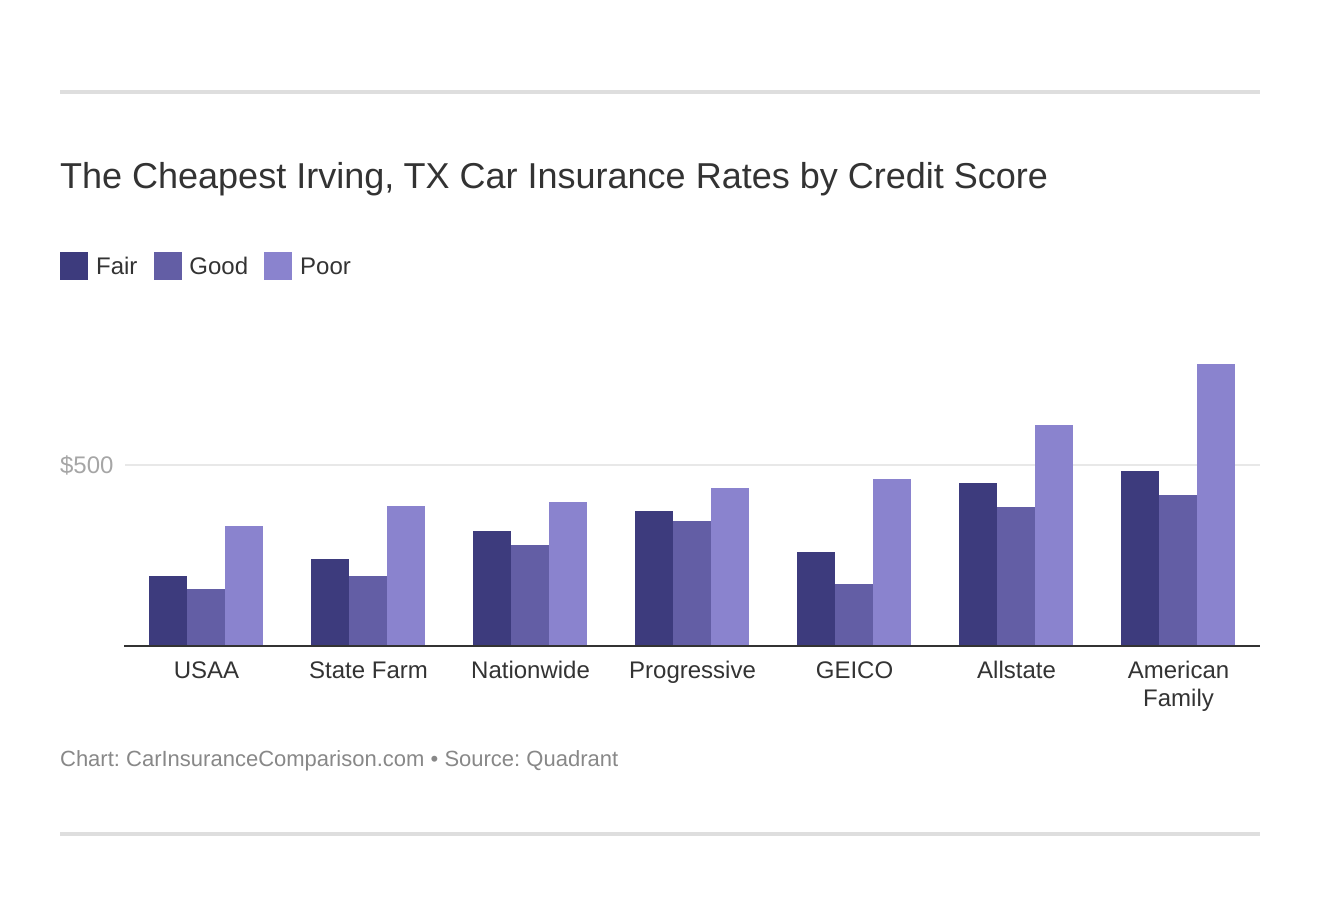 The Cheapest Irving, TX Car Insurance Rates by Credit Score